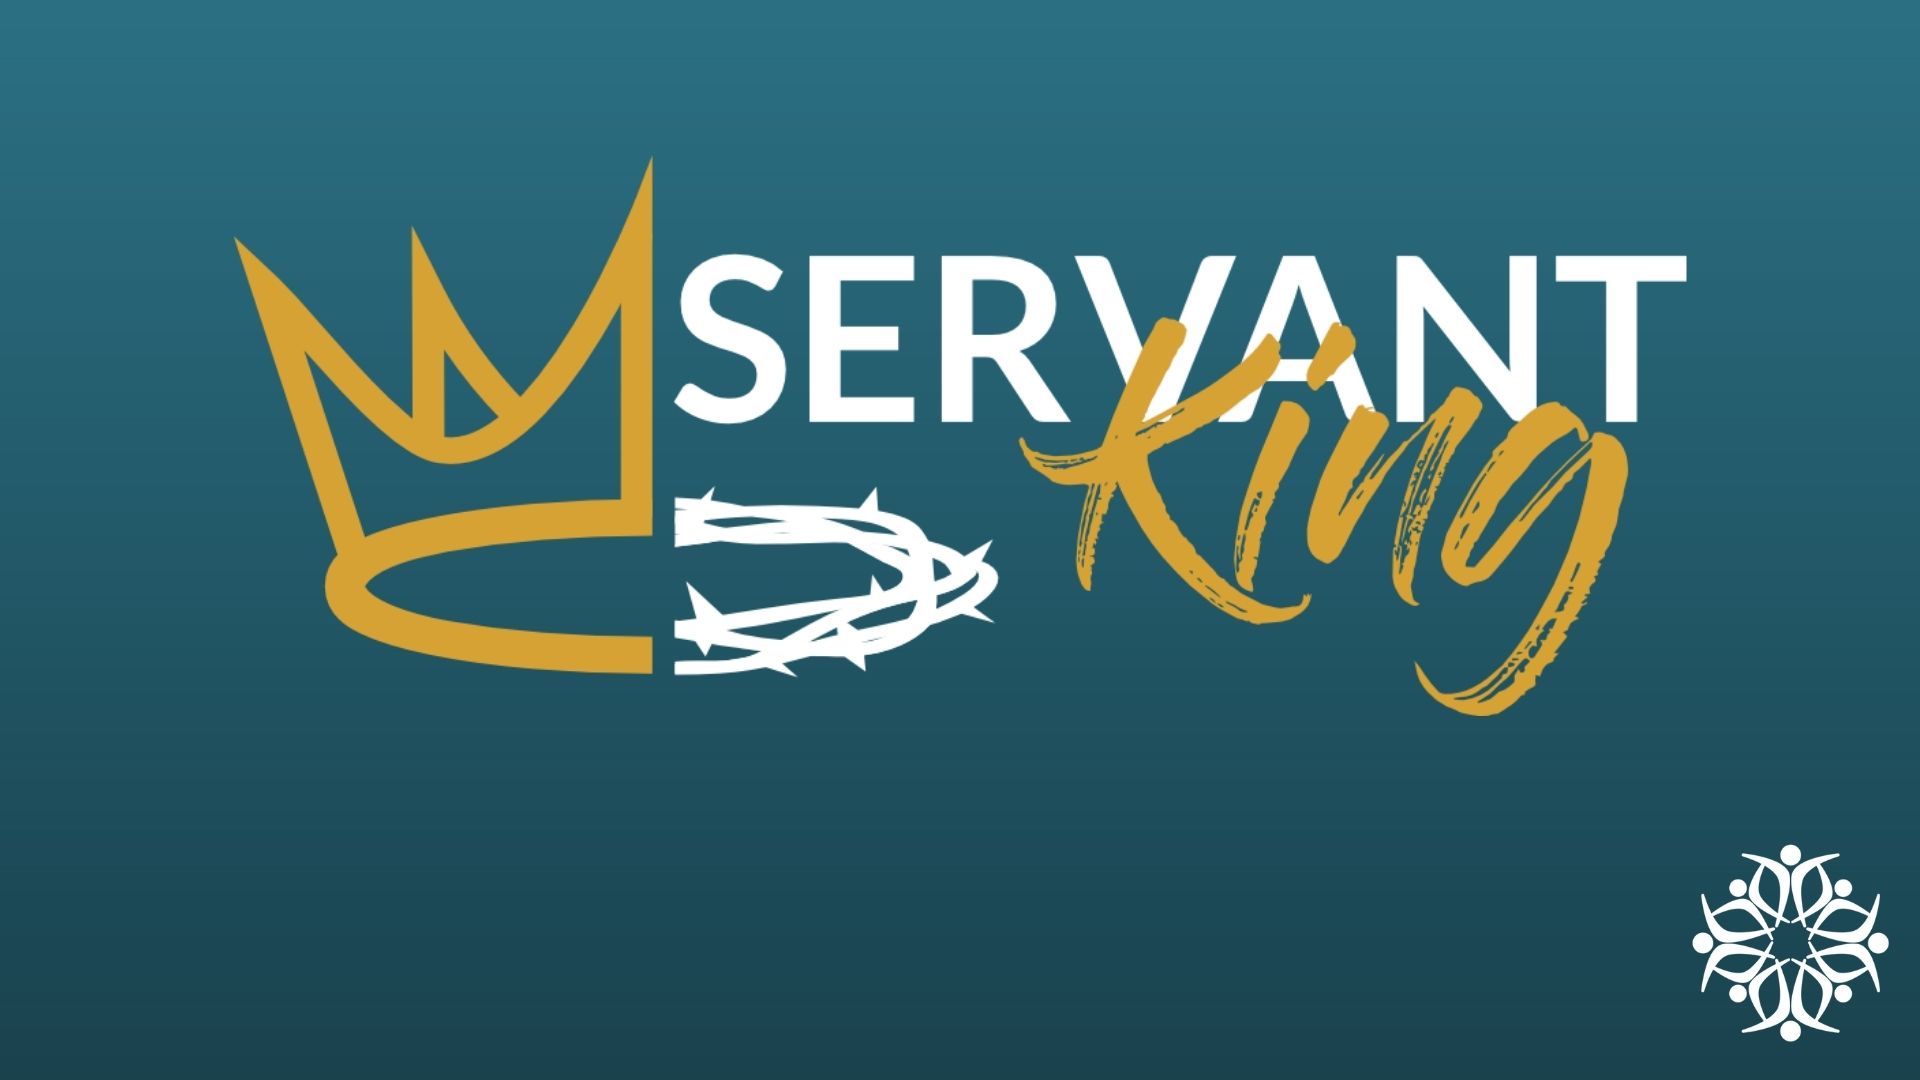 The Authority of the Servant King over our Greatest Need